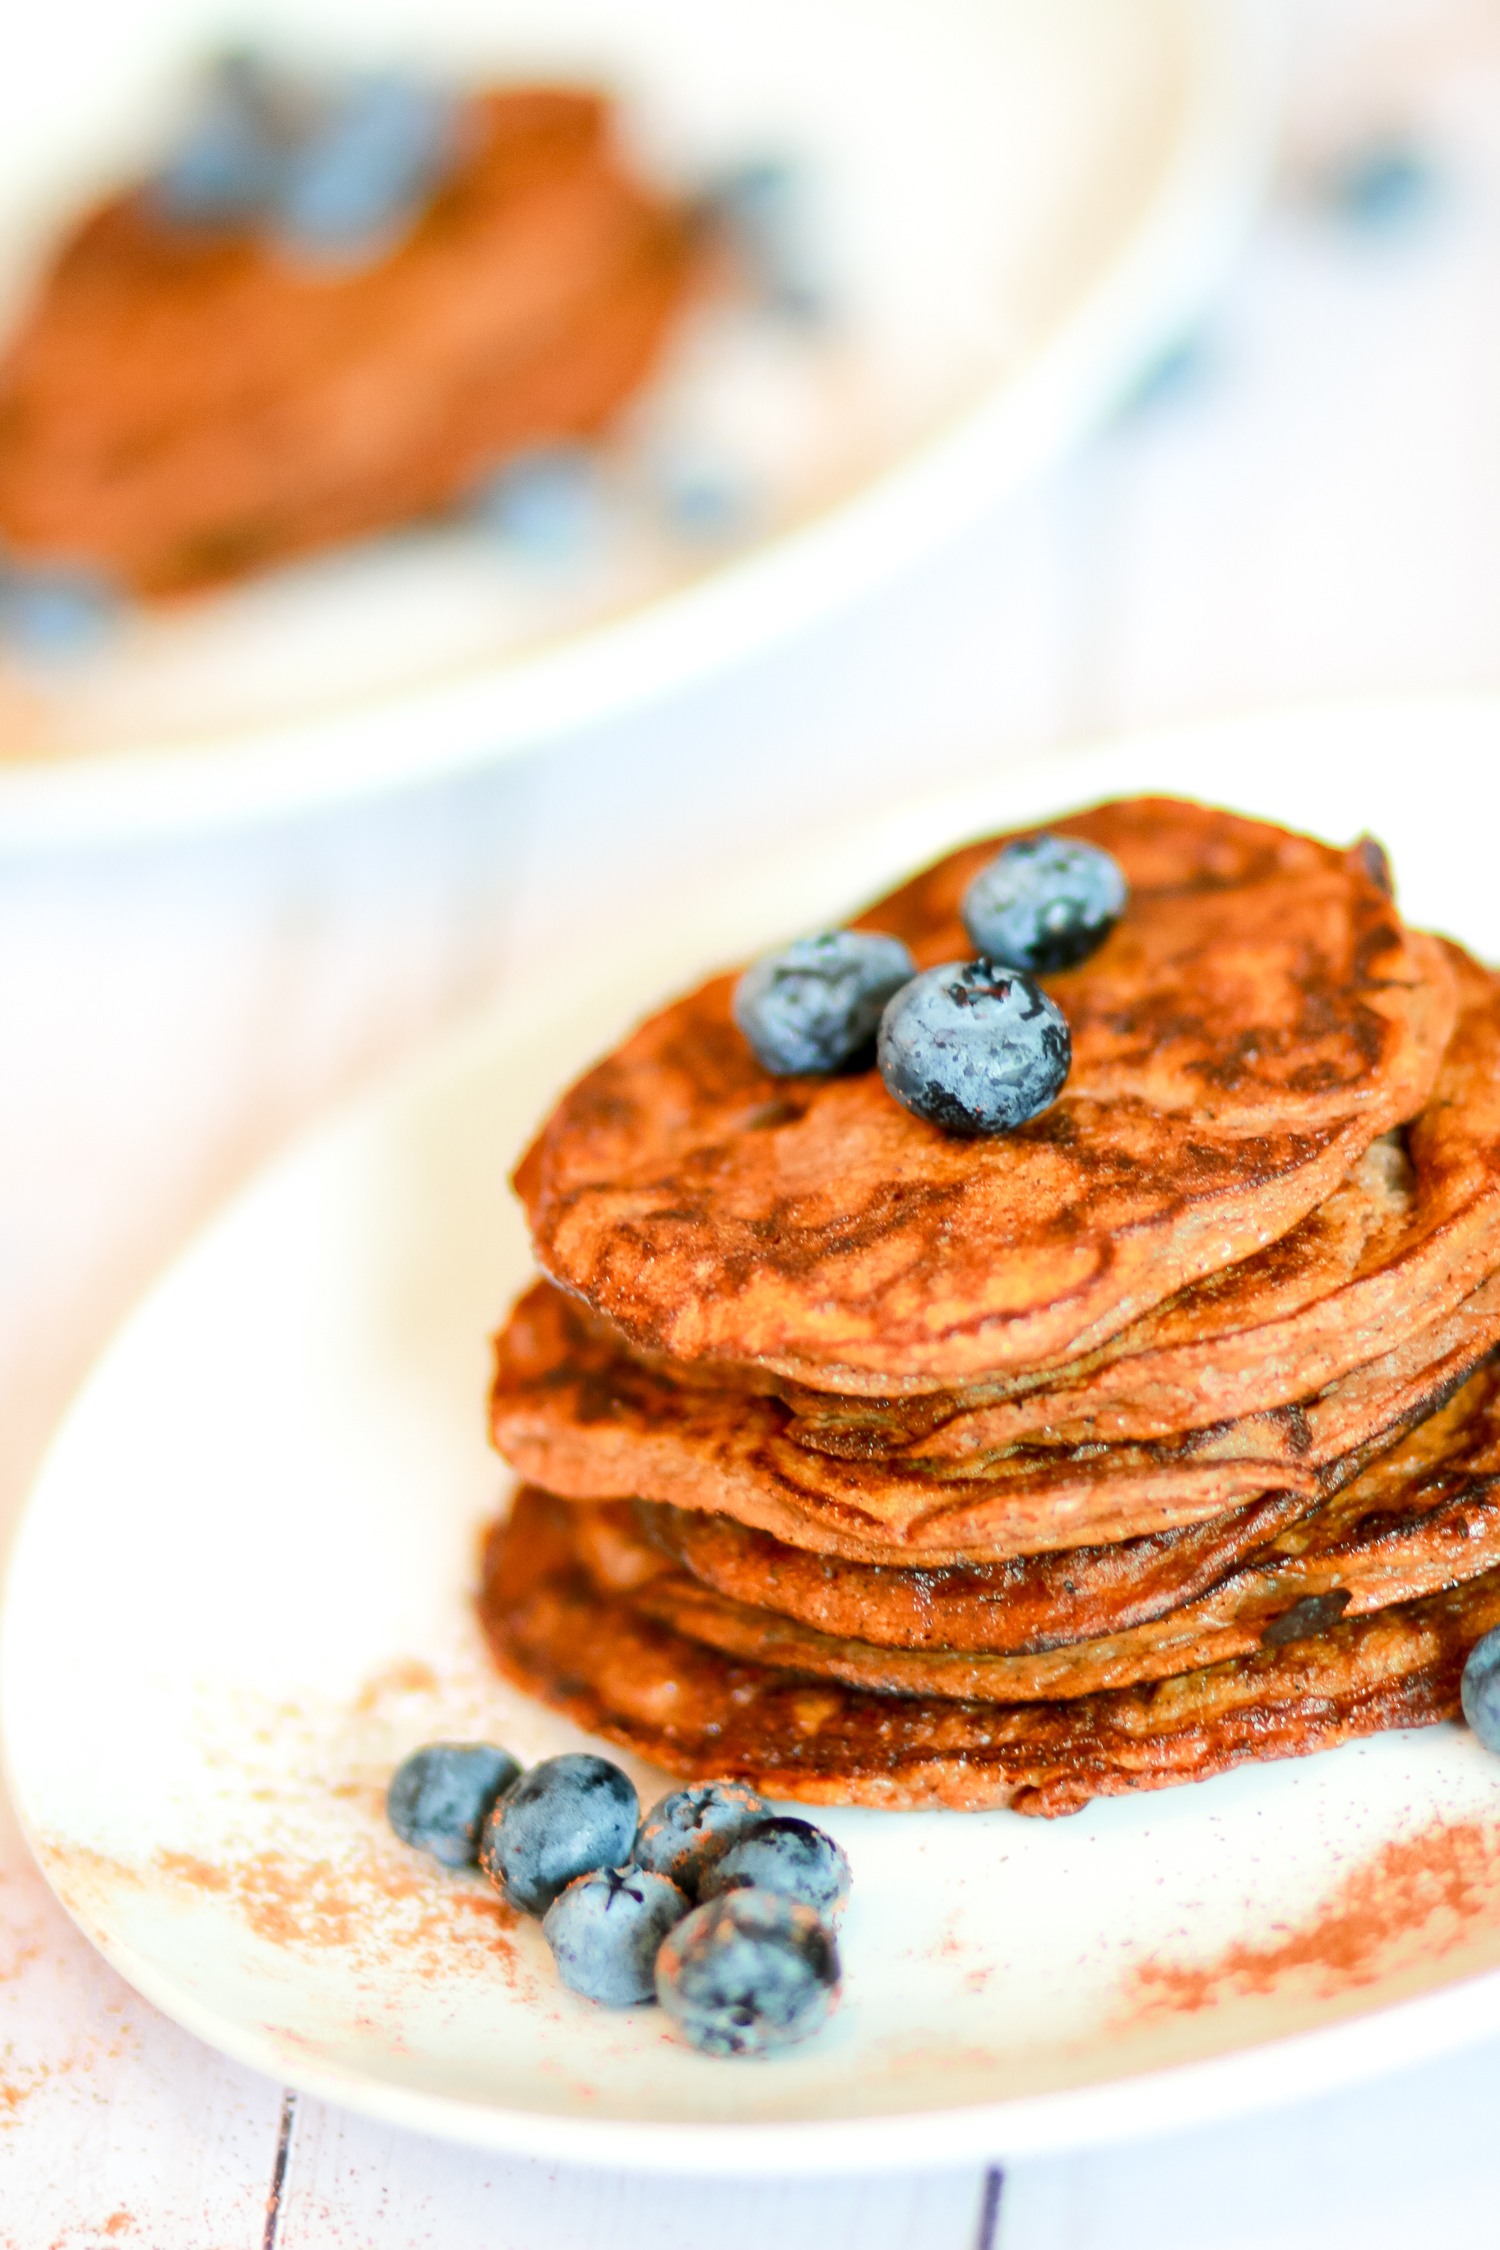 These delicious paleo pumpkin pancakes are low calorie and PERFECT for fall | Paleo Pumpkin Pancake recipe by southern blogger Stephanie Ziajka from Diary of a Debutante